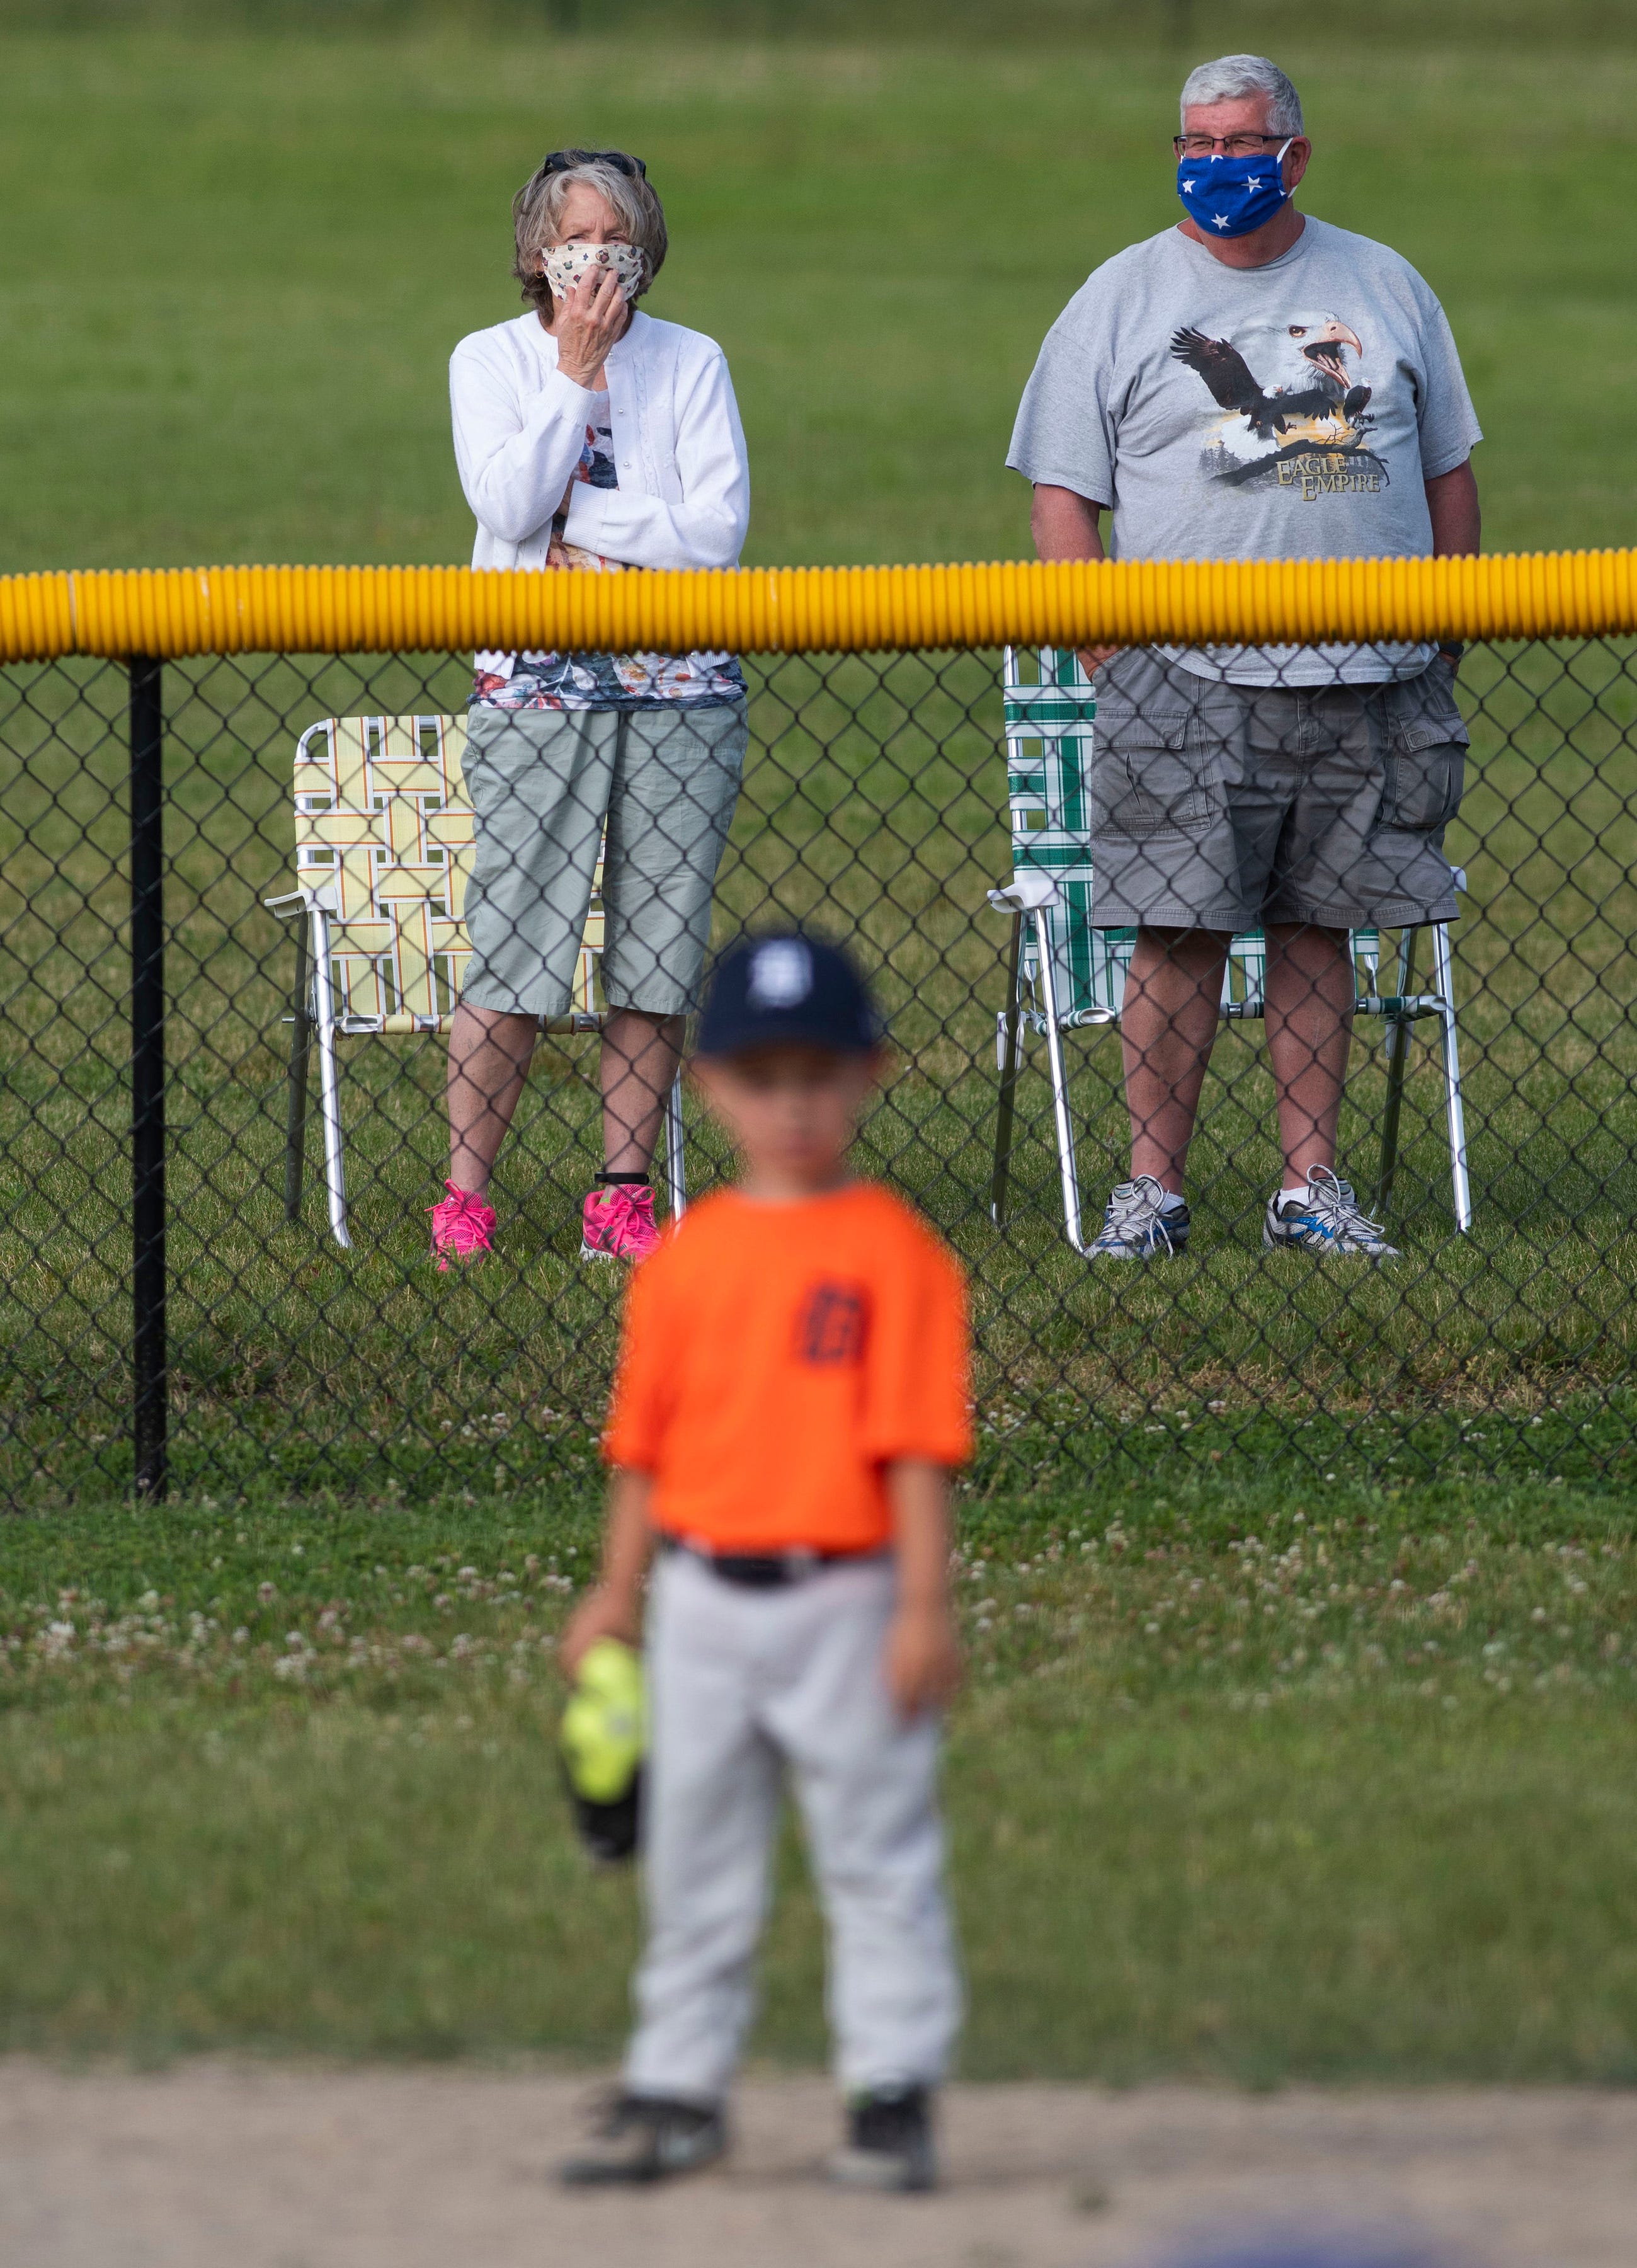 Masked spectators keep a safe distance as they watch a youth baseball game in Indianapolis on June 18.